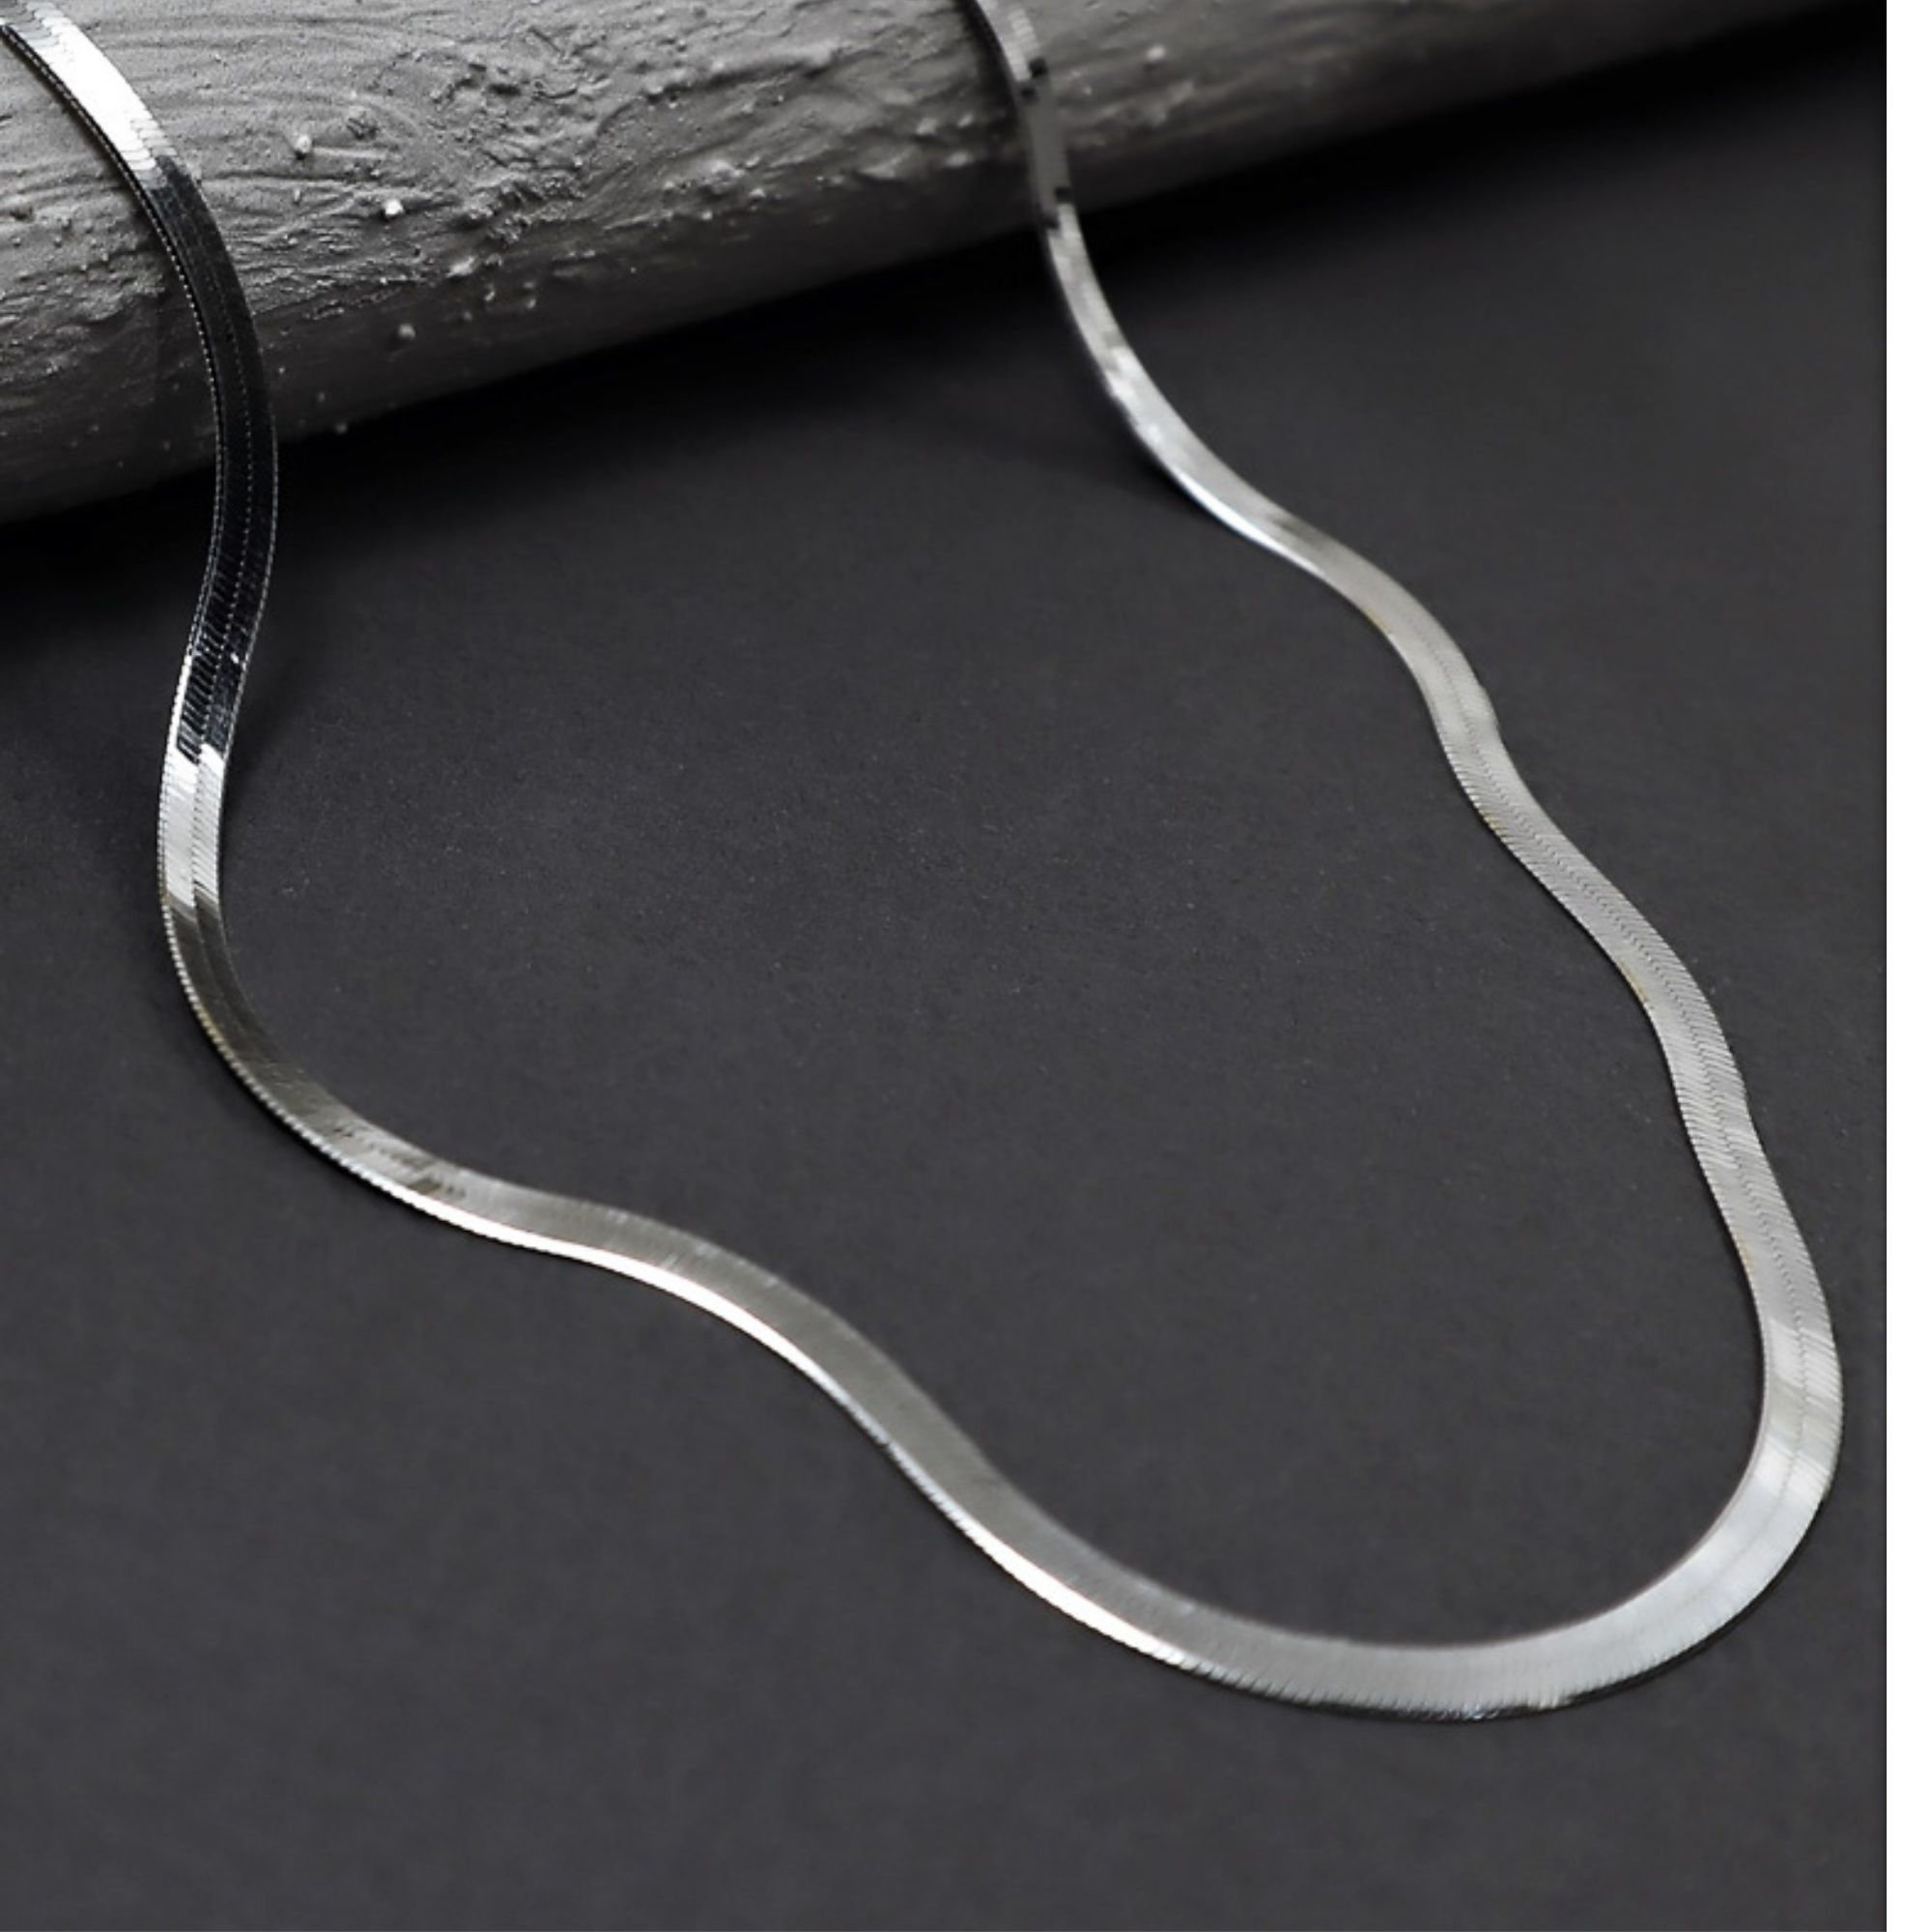 Silver Snake Chain Mens Silver Chain Necklace Mens Chain Stainless Steel Snake  Necklace 3mm, Mens Jewellery by Twistedpendant 